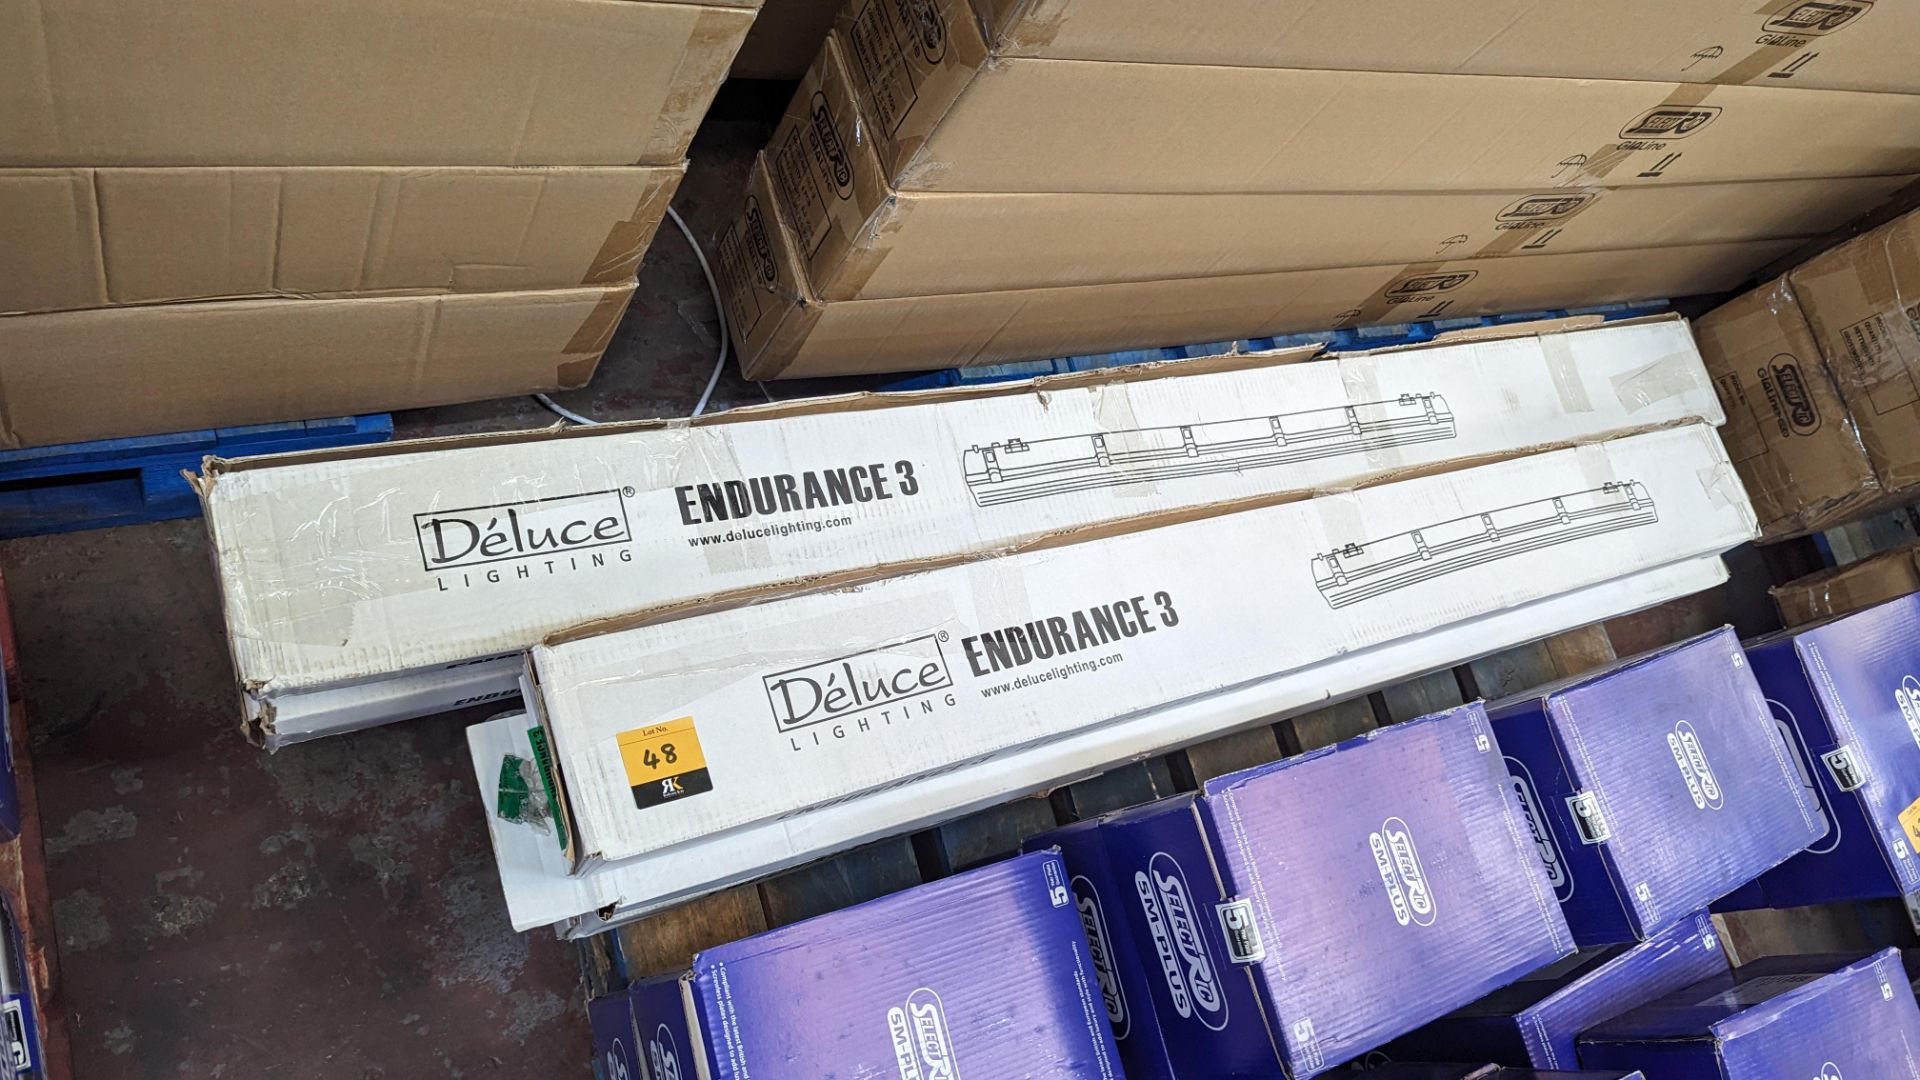 5 off Déluce Lighting Endurance 3 IP65 fluorescent fittings in 2 different lengths - Image 2 of 4